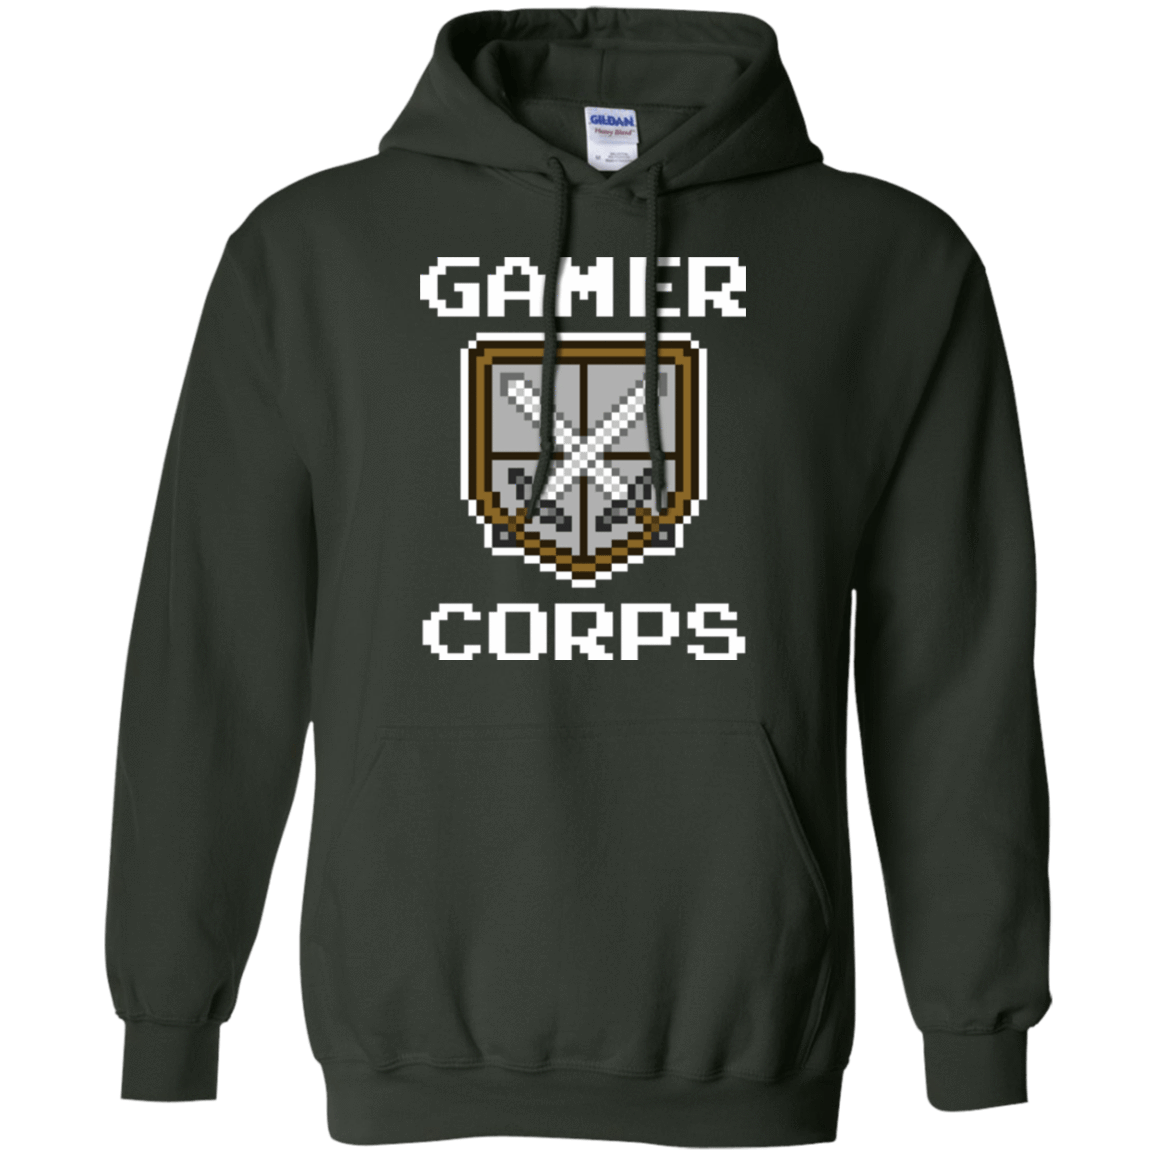 Sweatshirts Forest Green / Small Gamer corps Pullover Hoodie